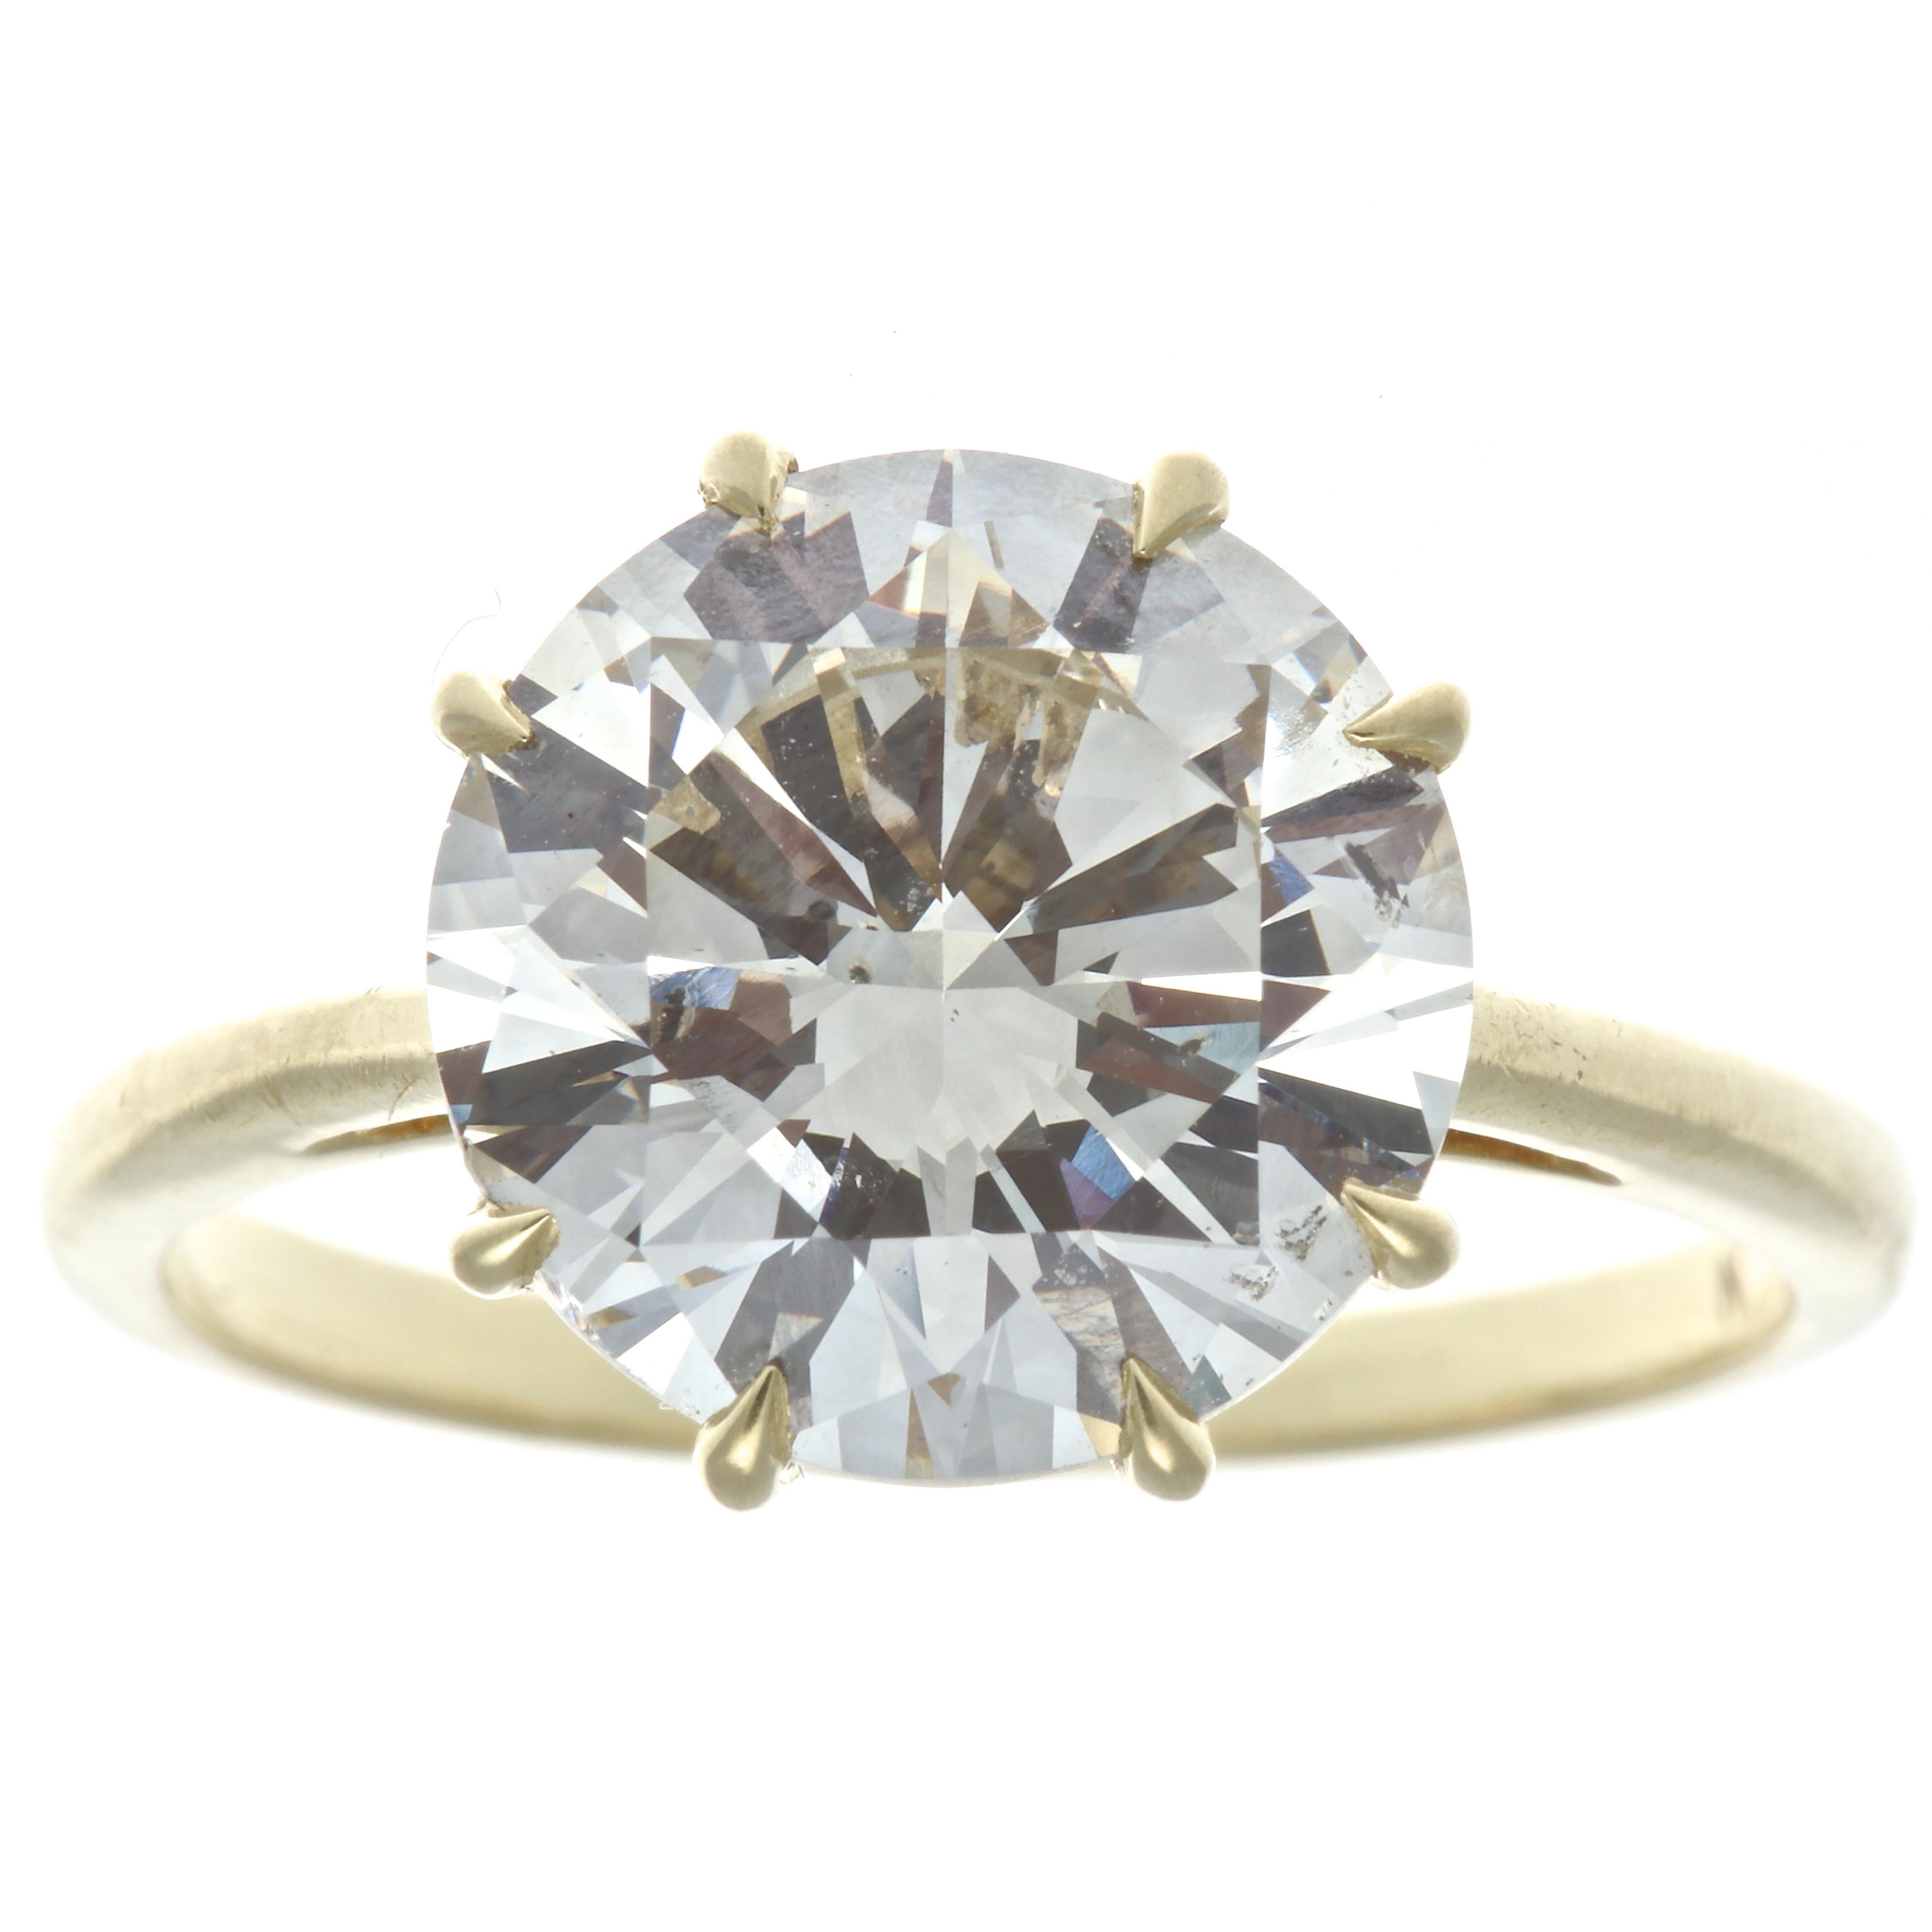 It all starts with a beautiful brilliant diamond. This GIA 4.06 carat round brilliant is graded O-P color, SI2 clarity and was made in the 1950's. Delicately supported in place by many 18k gold prongs, the perfect complement is made to this